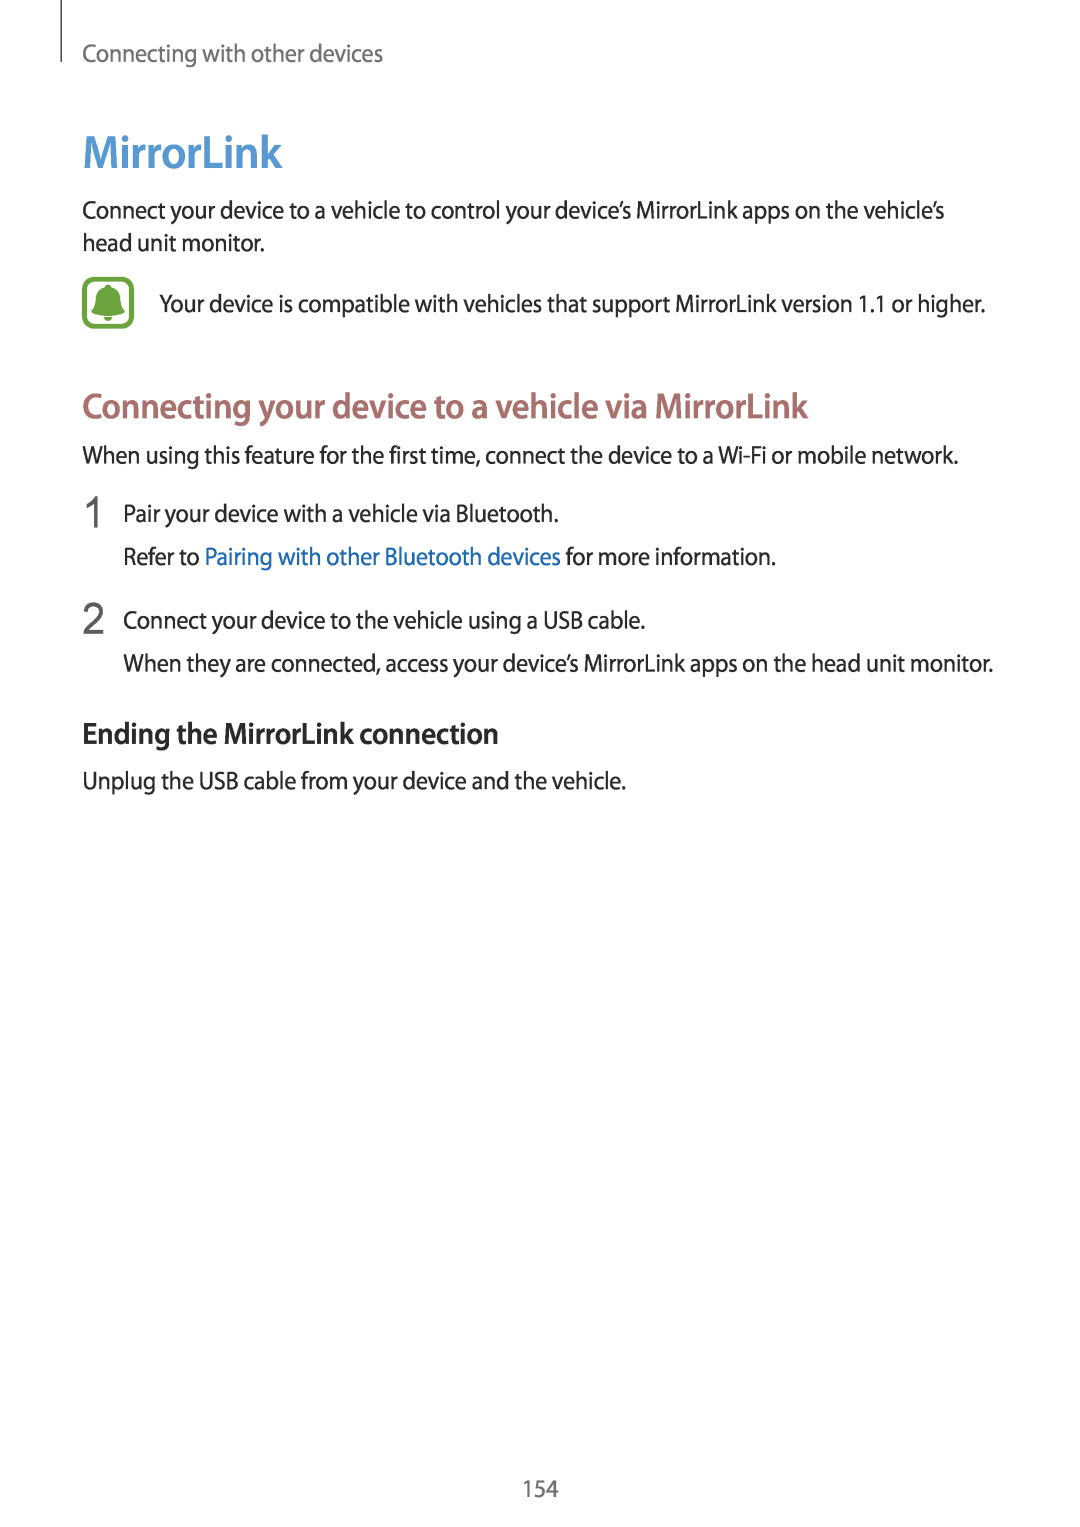 Samsung SM-N915FZKESER manual Connecting your device to a vehicle via MirrorLink, Ending the MirrorLink connection 